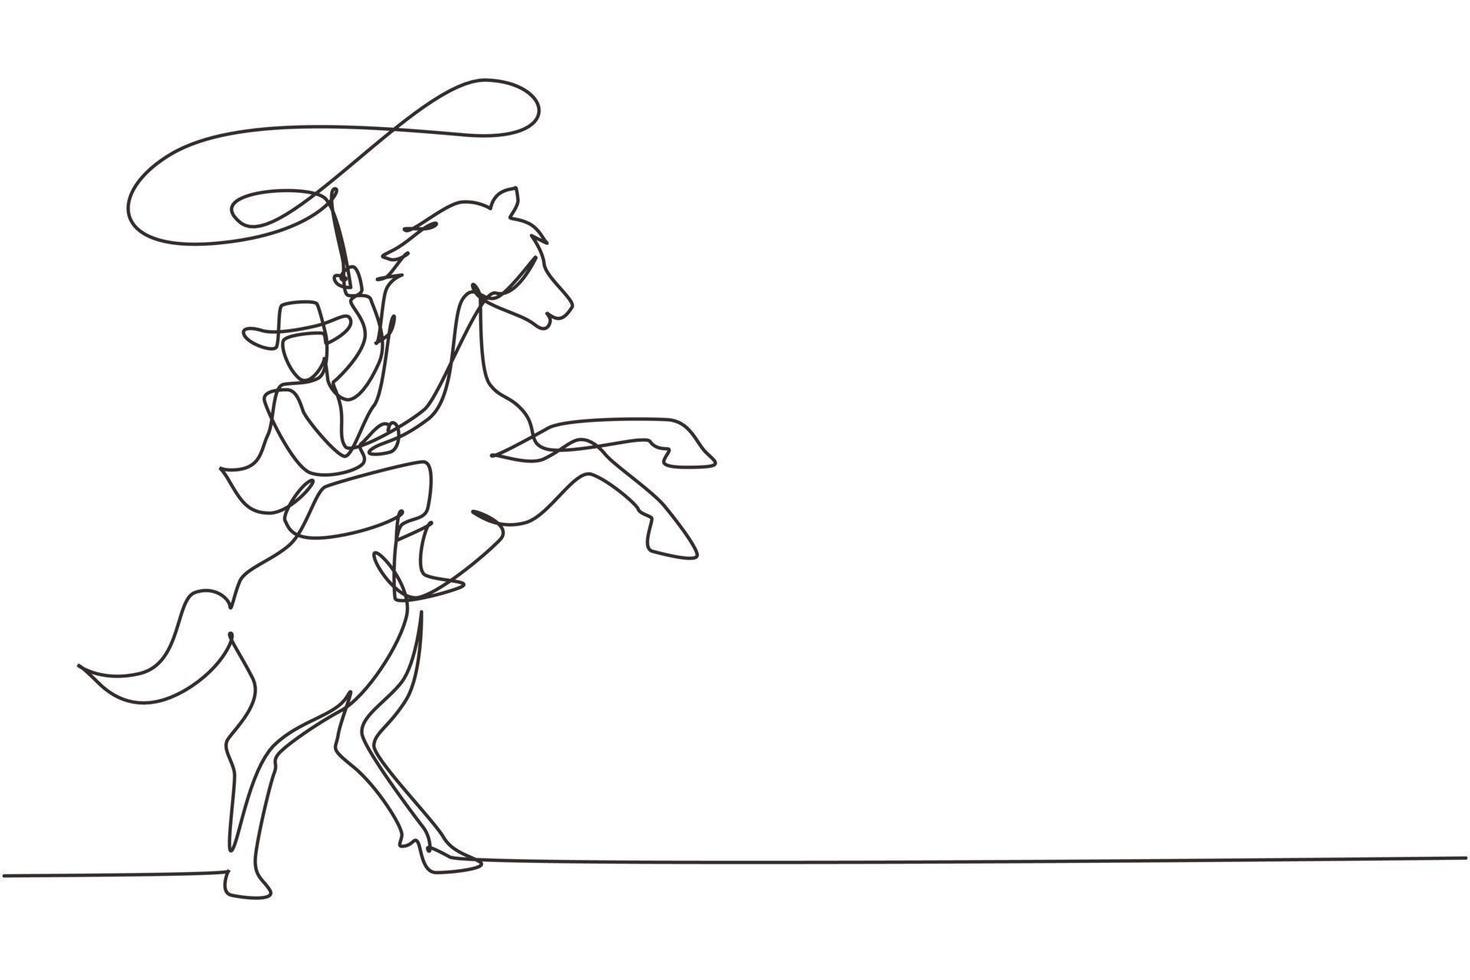 Continuous one line drawing cowboy throwing lasso riding rearing up horse. American cowboy riding horse and throwing lasso. Cowboy with rope lasso on horse. Single line draw design vector graphic